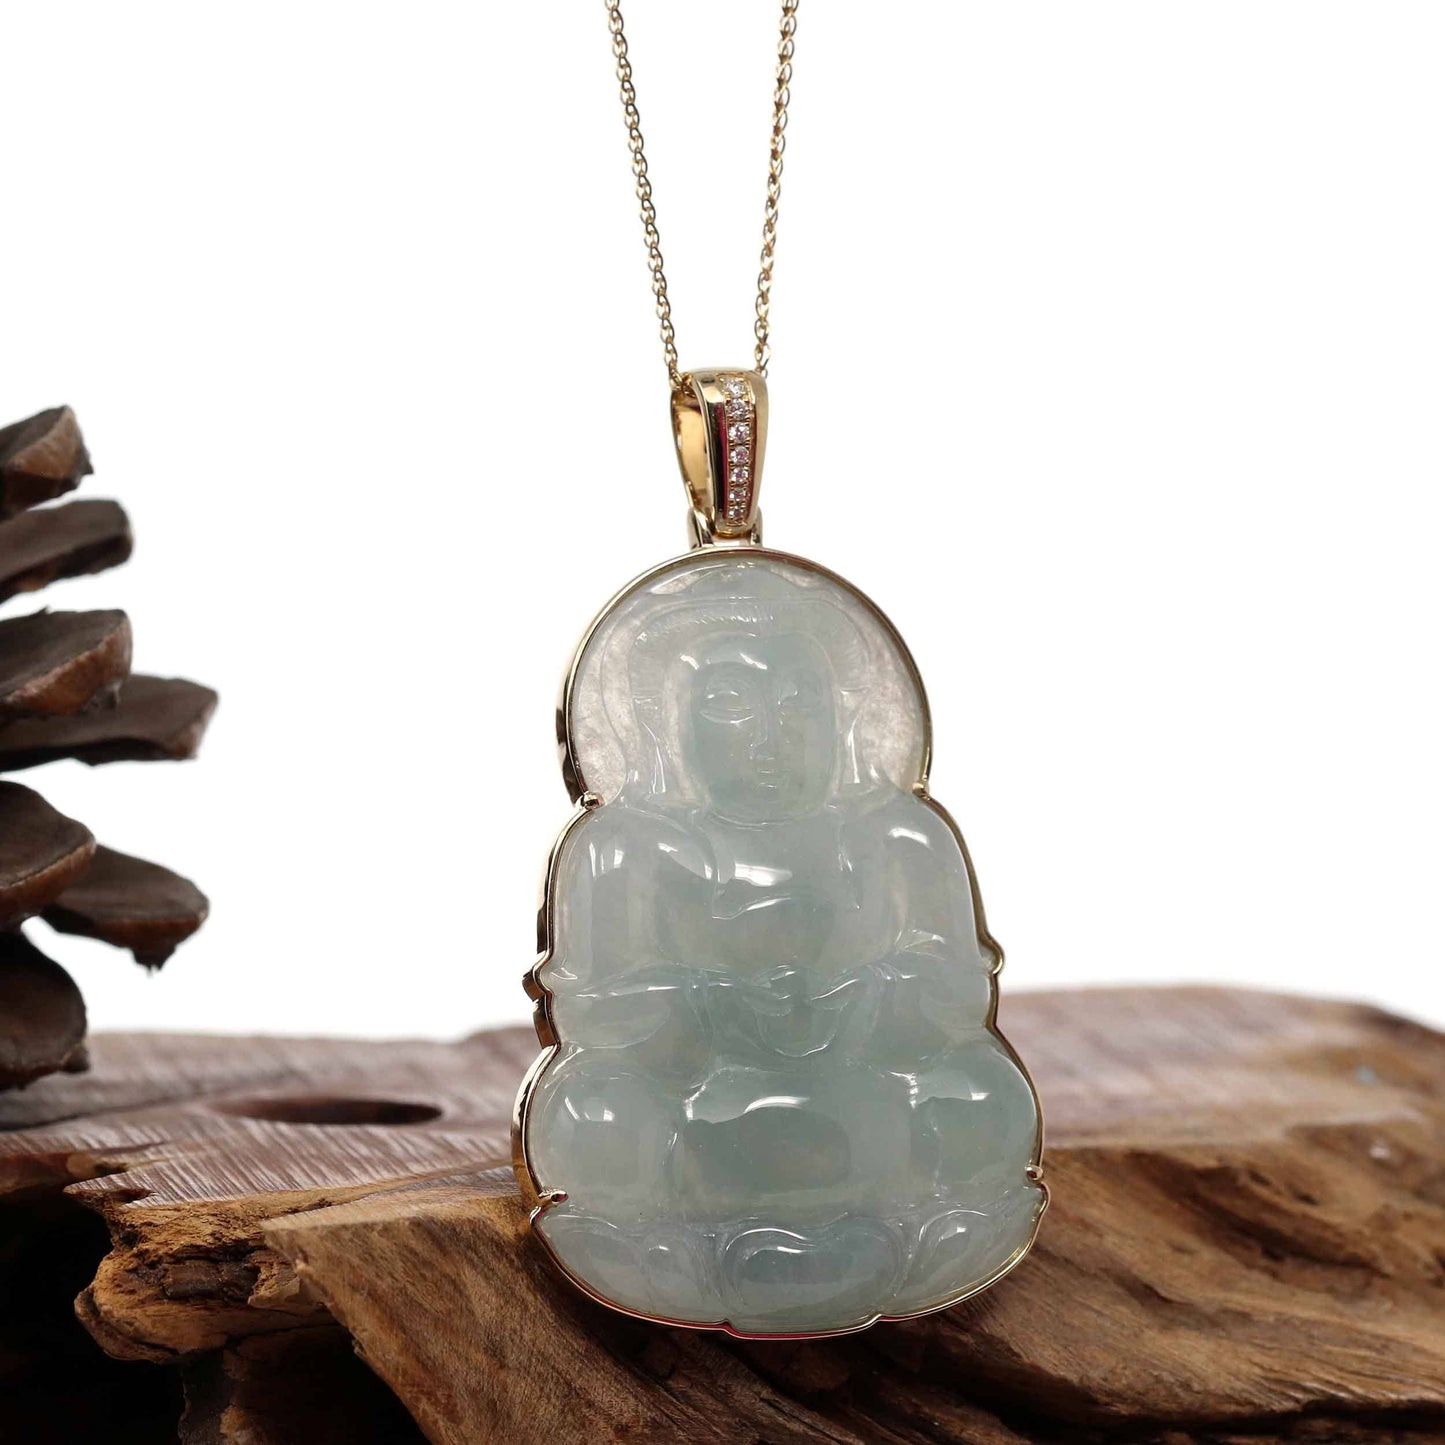 RealJade® Co. Jade Guanyin Pendant Necklace  "Goddess of Compassion" 14k Yellow Gold Genuine Burmese Jadeite Jade Guanyin Necklace With Good Luck Design